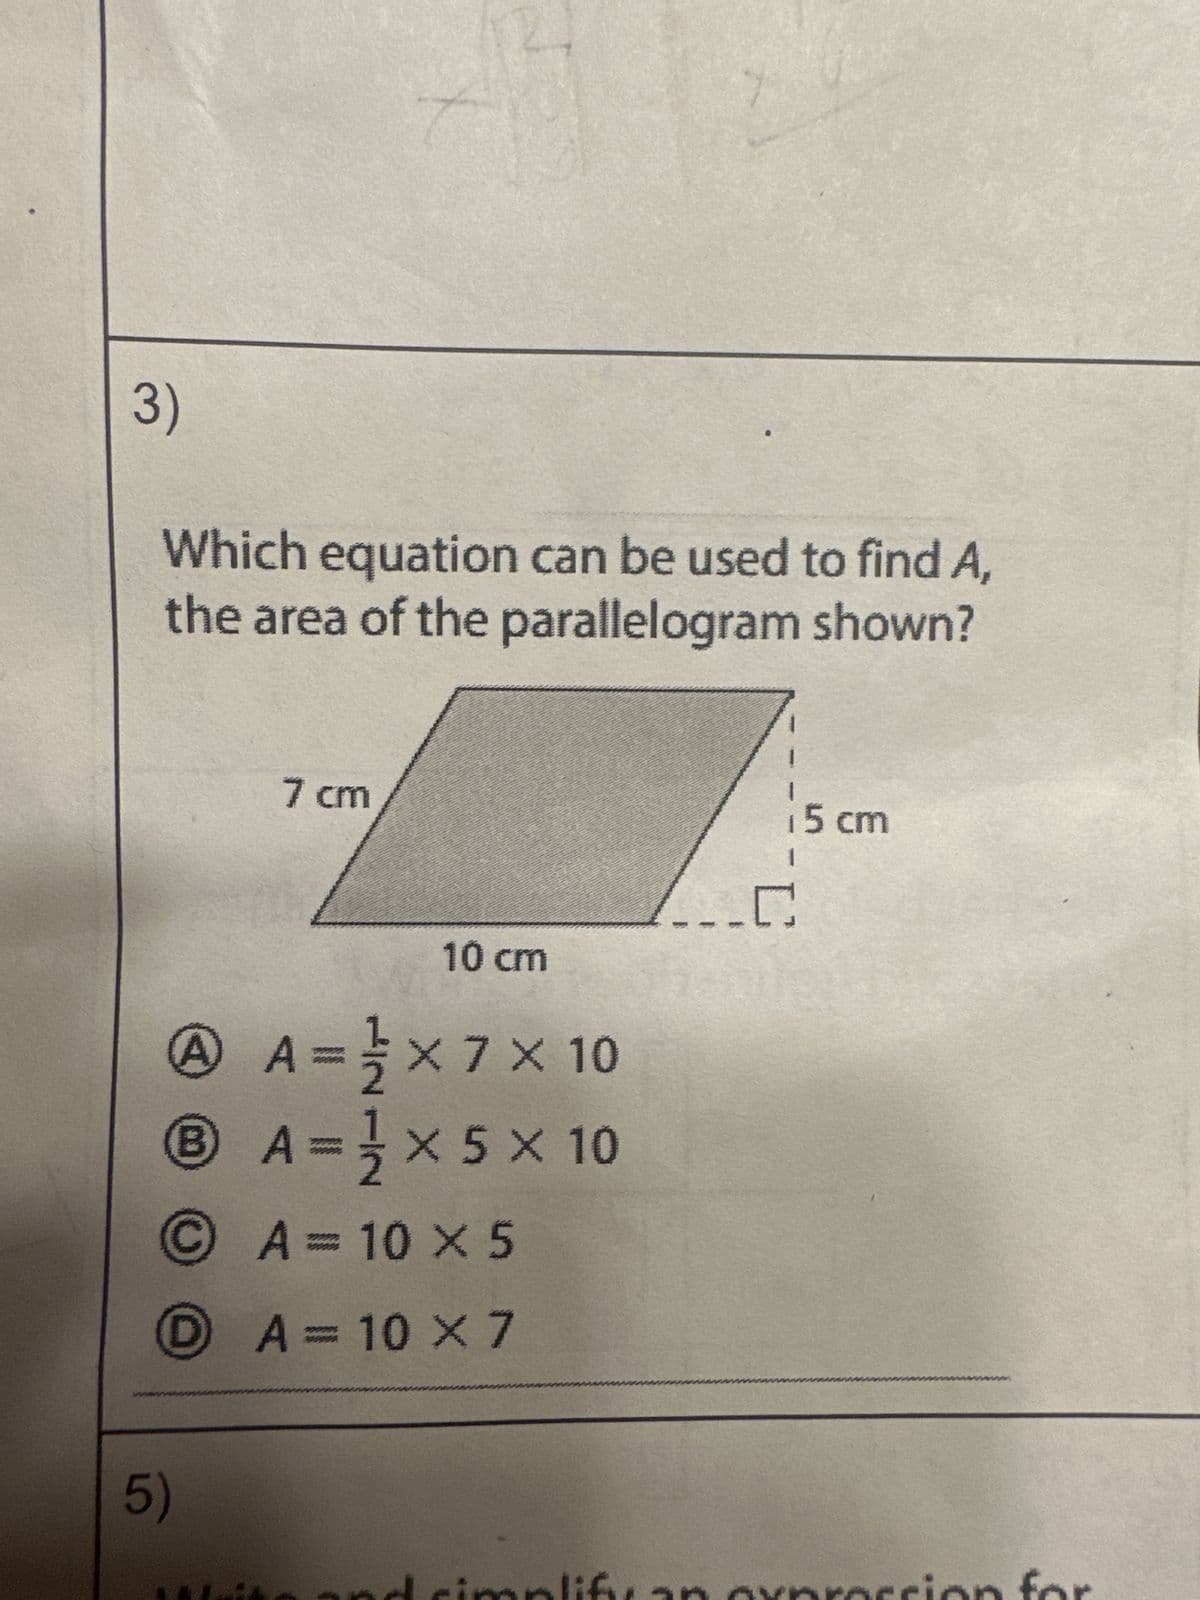 3)
Which equation can be used to find A,
the area of the parallelogram shown?
7 cm
10 cm
A
X X
A = ² × 7 × 10
® A=¹× 5 × 10
ⒸA= 10 x 5
X
DA= 10 x 7
5)
implif
i5 cm
..C